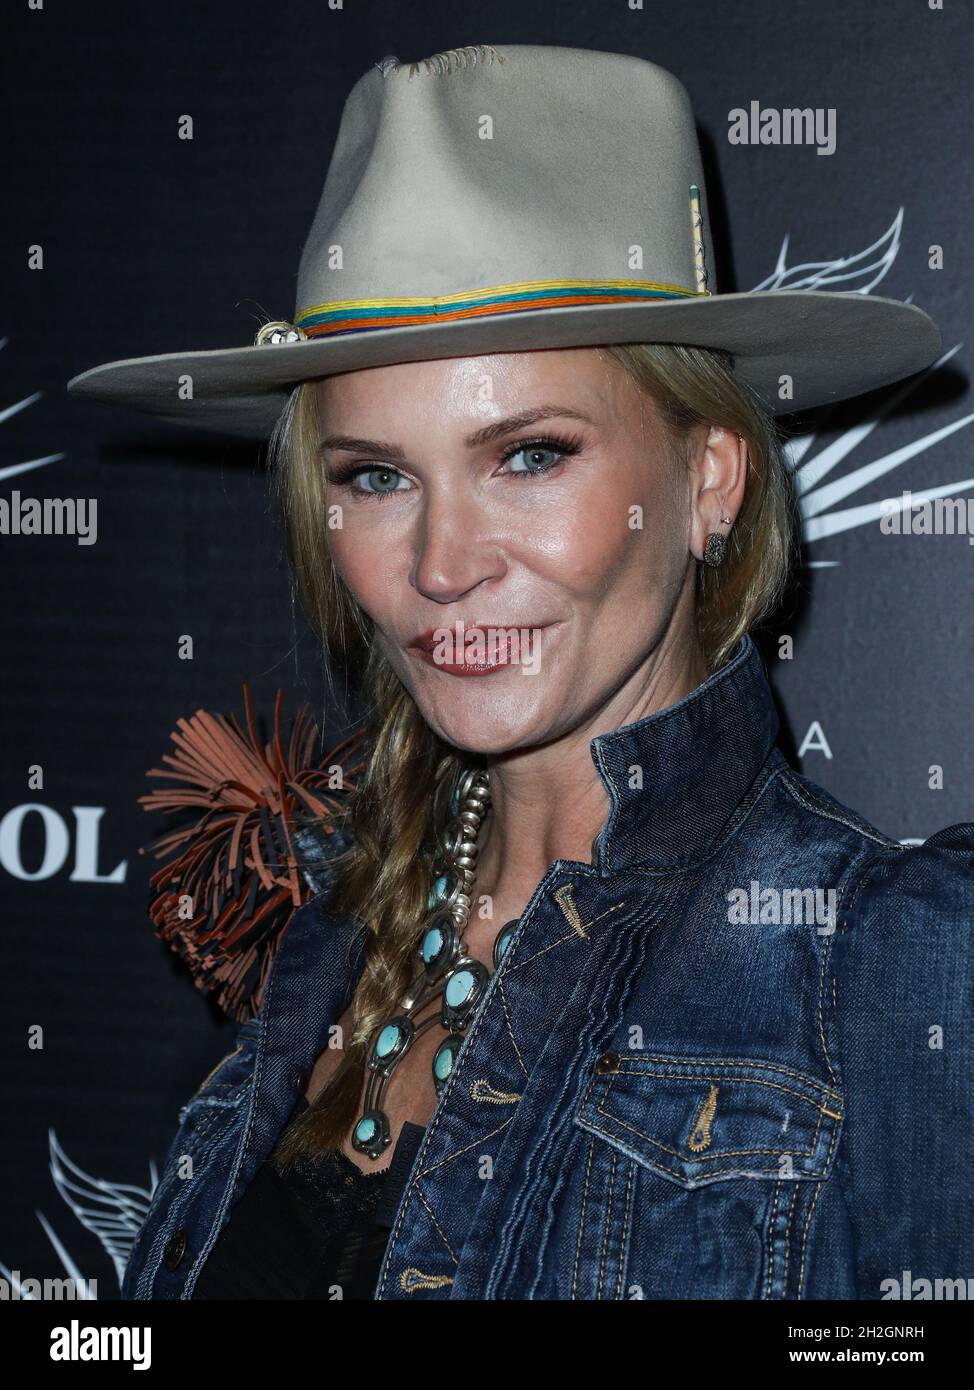 Los Angeles, United States. 21st Oct, 2021. LOS ANGELES, CALIFORNIA, USA - OCTOBER 21: Actress Natasha Henstridge arrives at Brian Bowen Smith's Drivebys Book Launch And Gallery Viewing Presented By Casa Del Sol Tequila held at 8175 Melrose Ave on October 21, 2021 in Los Angeles, California, United States. (Photo by Xavier Collin/Image Press Agency/Sipa USA) Credit: Sipa USA/Alamy Live News Stock Photo